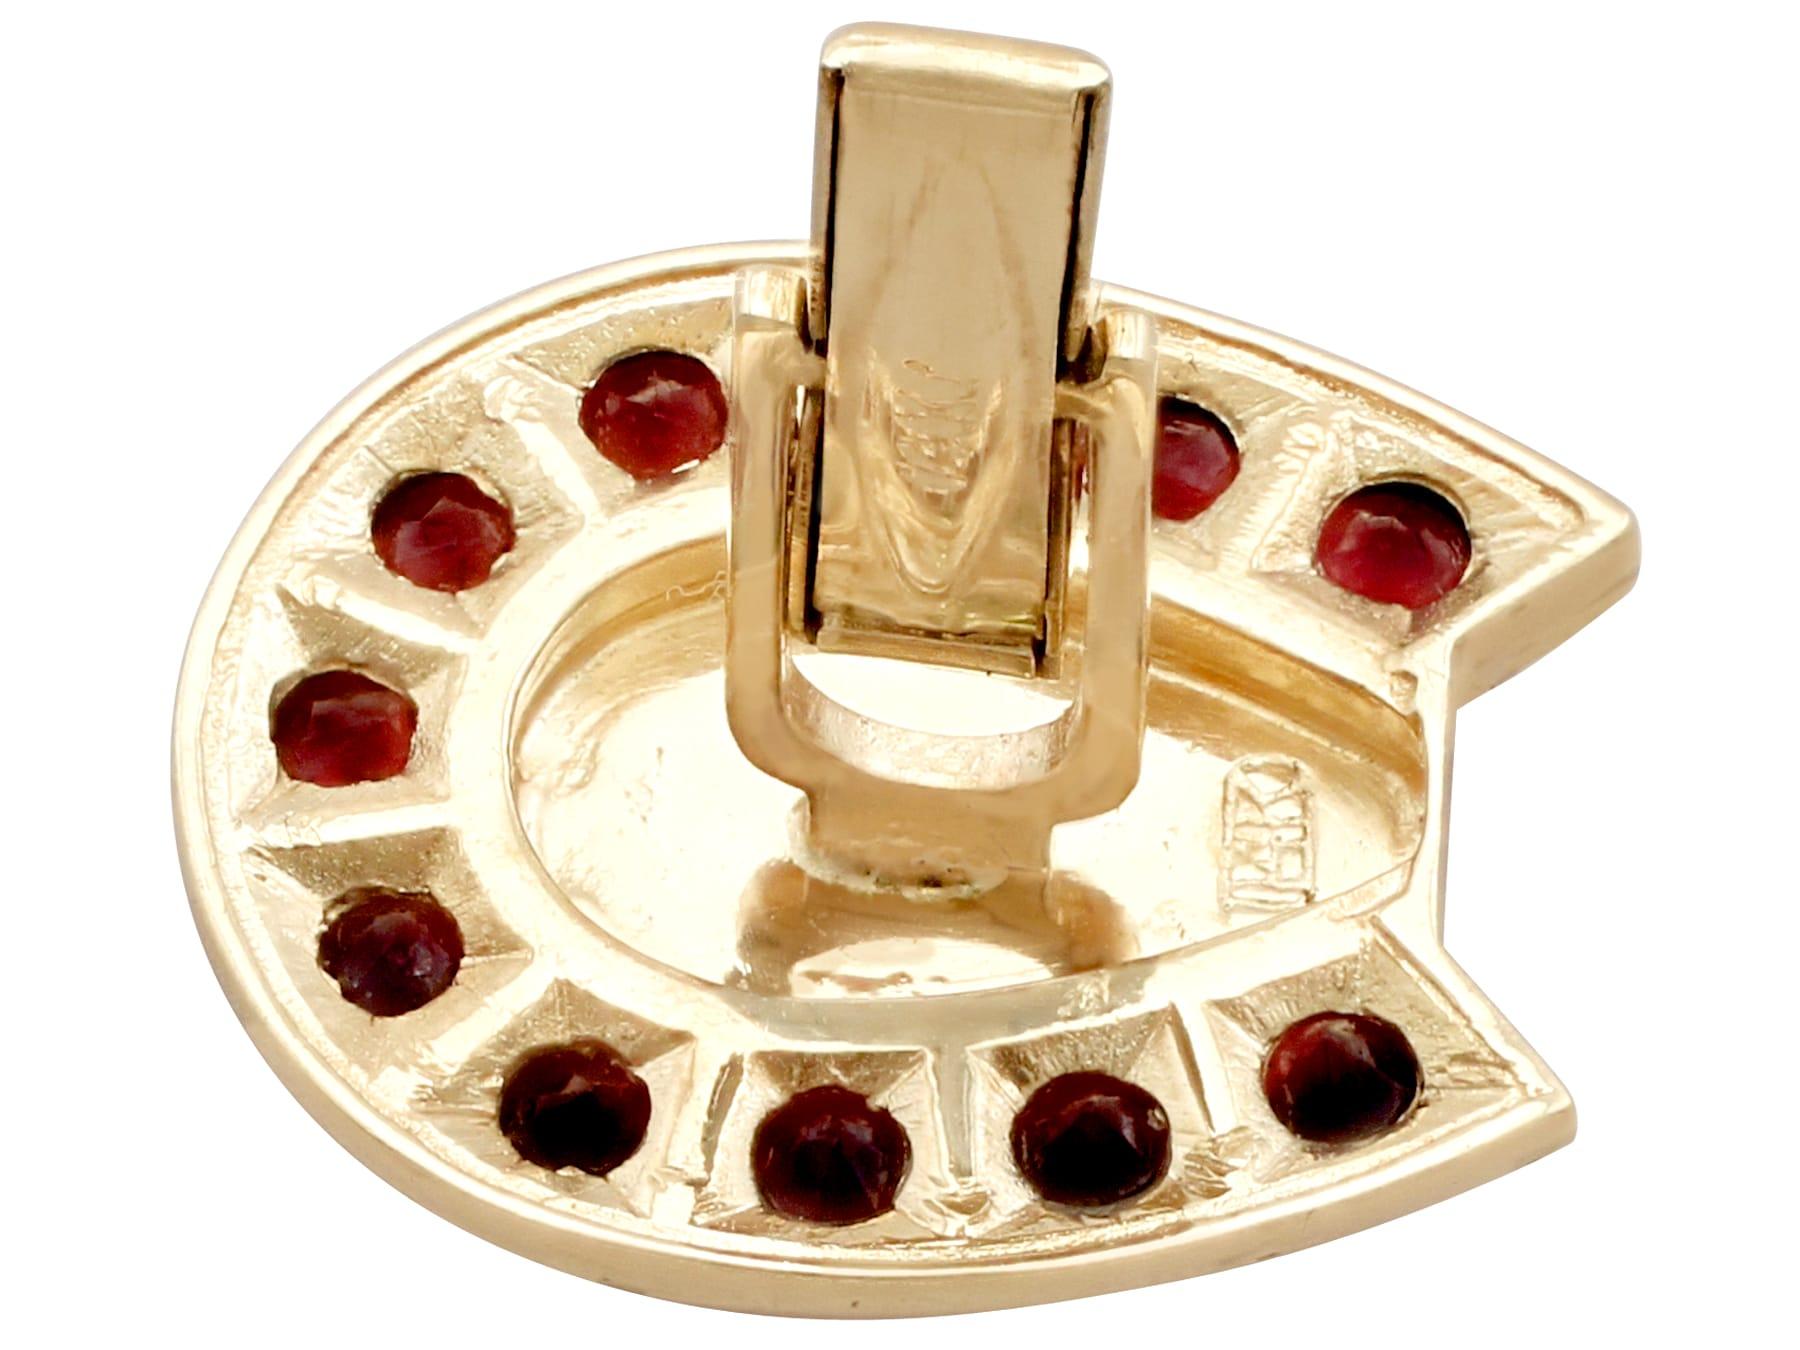 Vintage 1950s 3.82 Carat Garnet and Yellow Gold Horseshoe Cufflinks For Sale 1